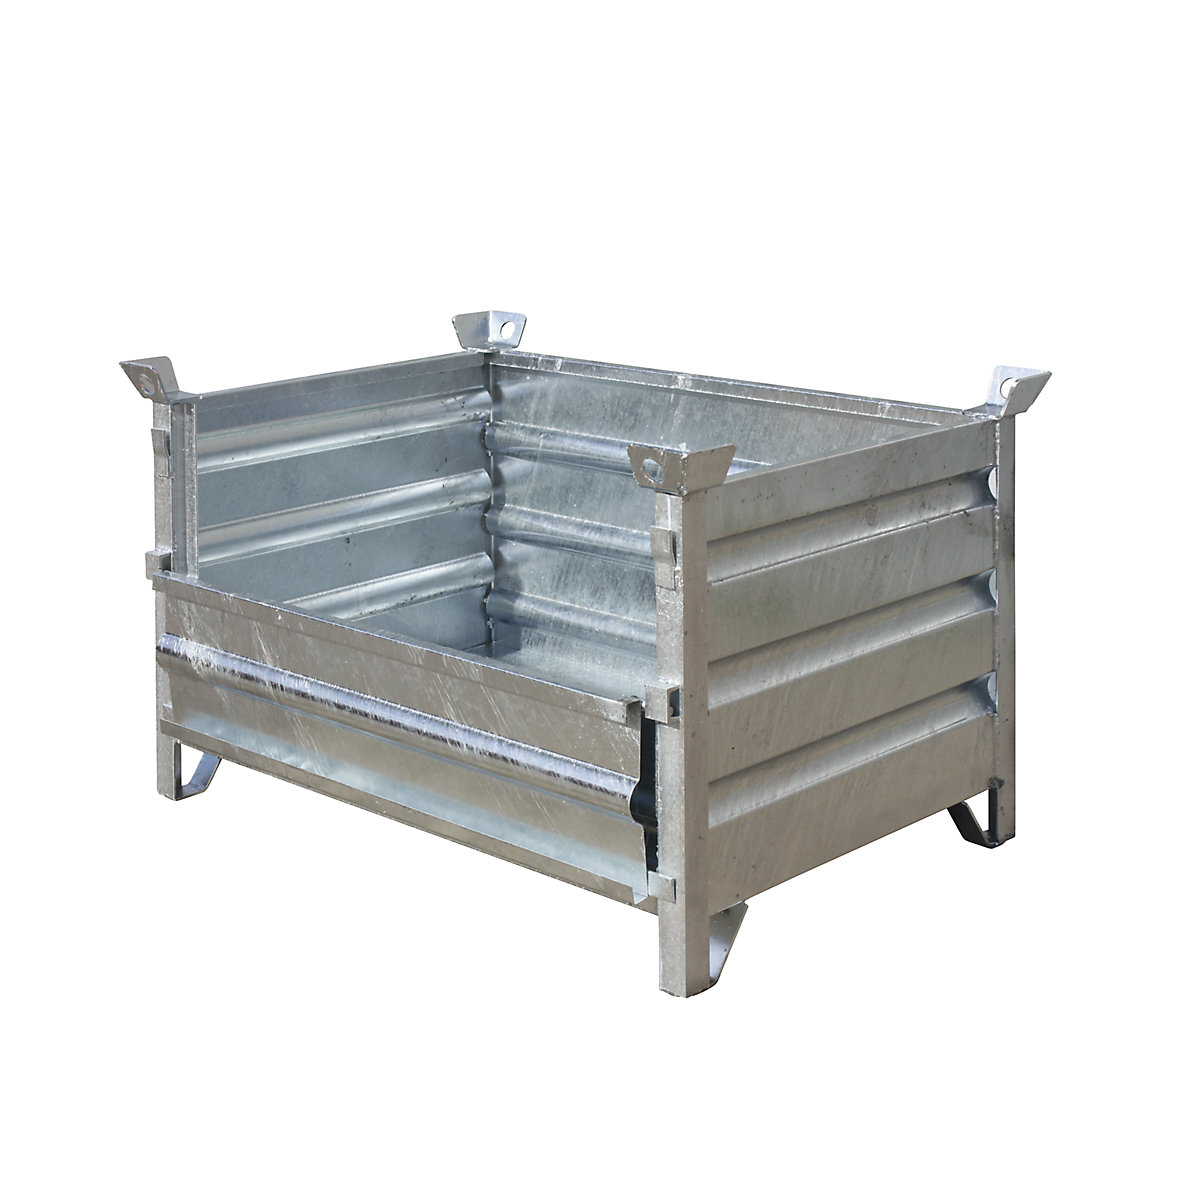 Solid panel box pallet – Eichinger, LxWxH 1500 x 800 x 750 mm, long side 1/3 foldable, zinc plated-2